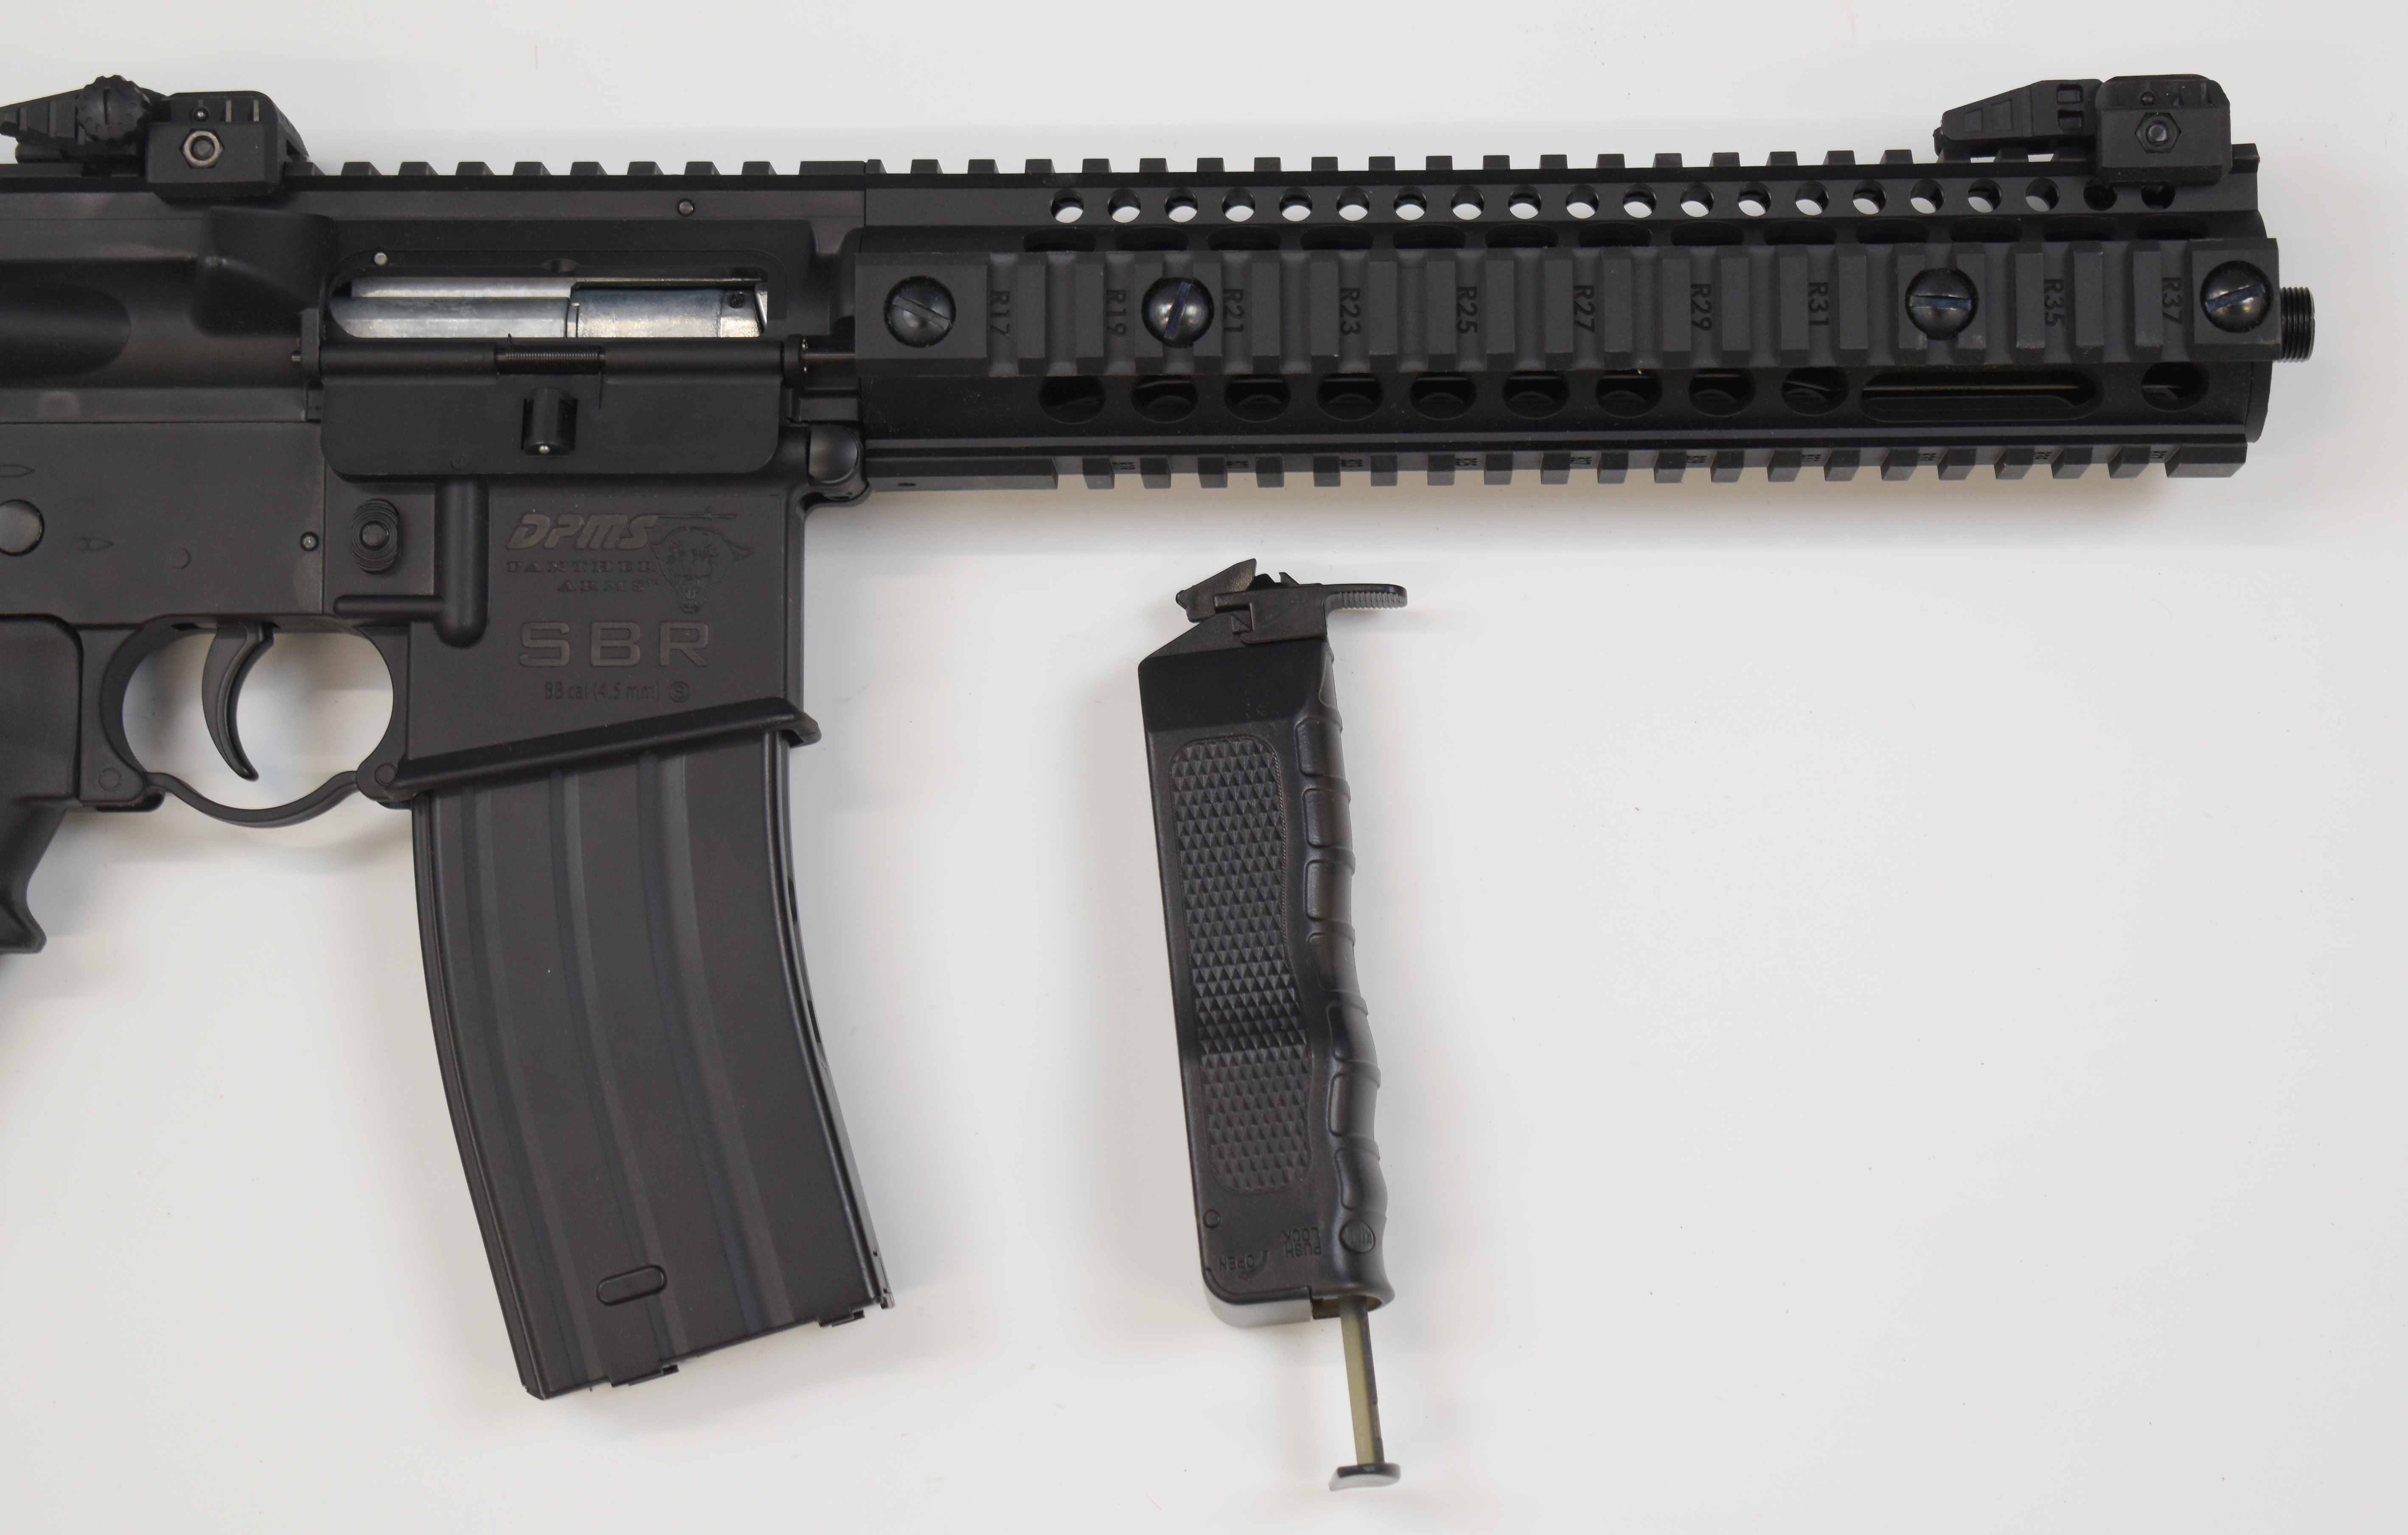 Crosman SBR .177 CO2 assault style air rifle with textured pistol grip, tactical stock, multi-shot - Image 4 of 9